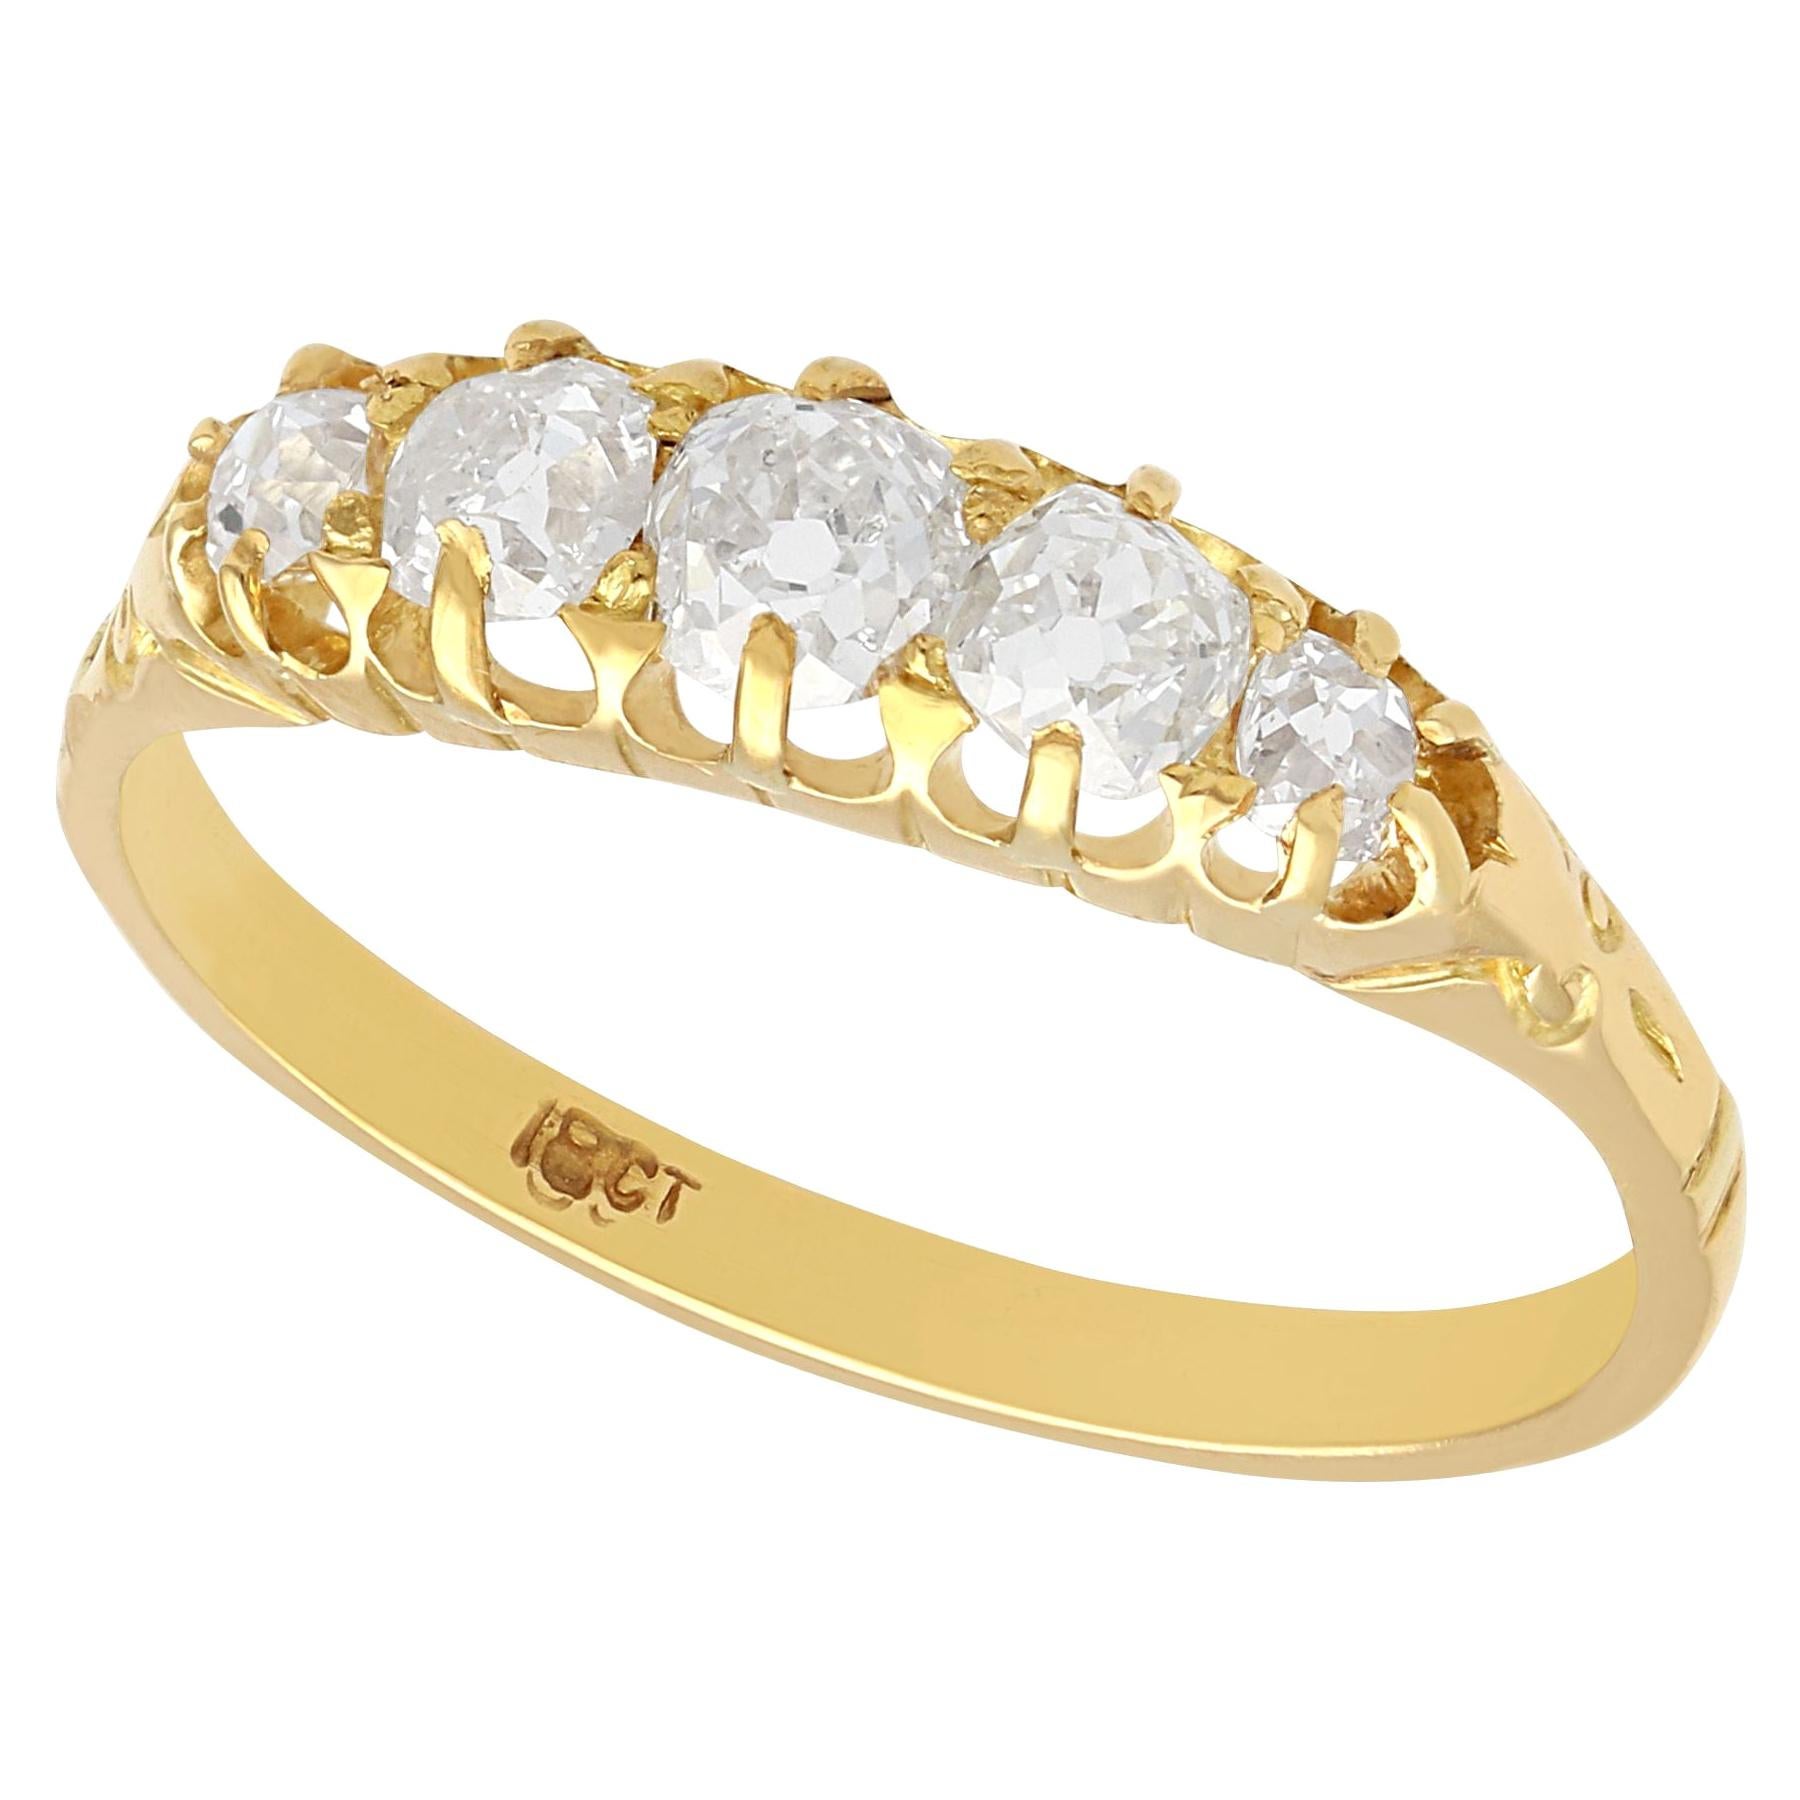 Antique 1900s Diamond and Yellow Gold Five-Stone Ring